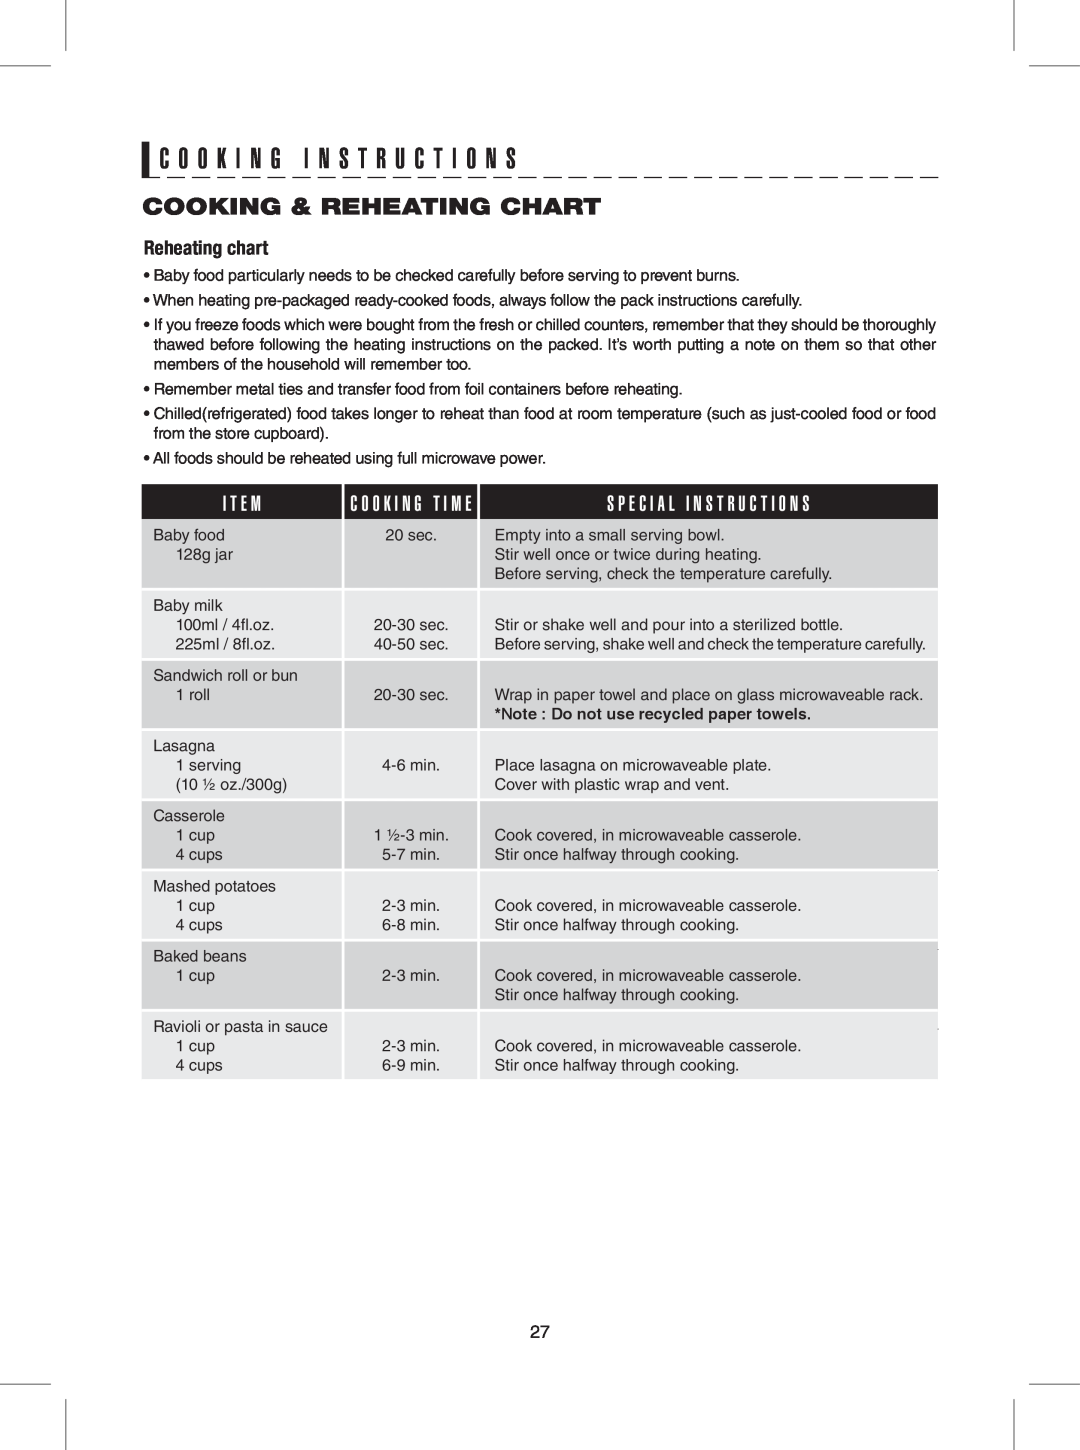 Sharp R-409Y warranty Cooking & Reheating Chart, C O O K I N G I N S T R U C T I O N S, I T E M, Reheating chart 